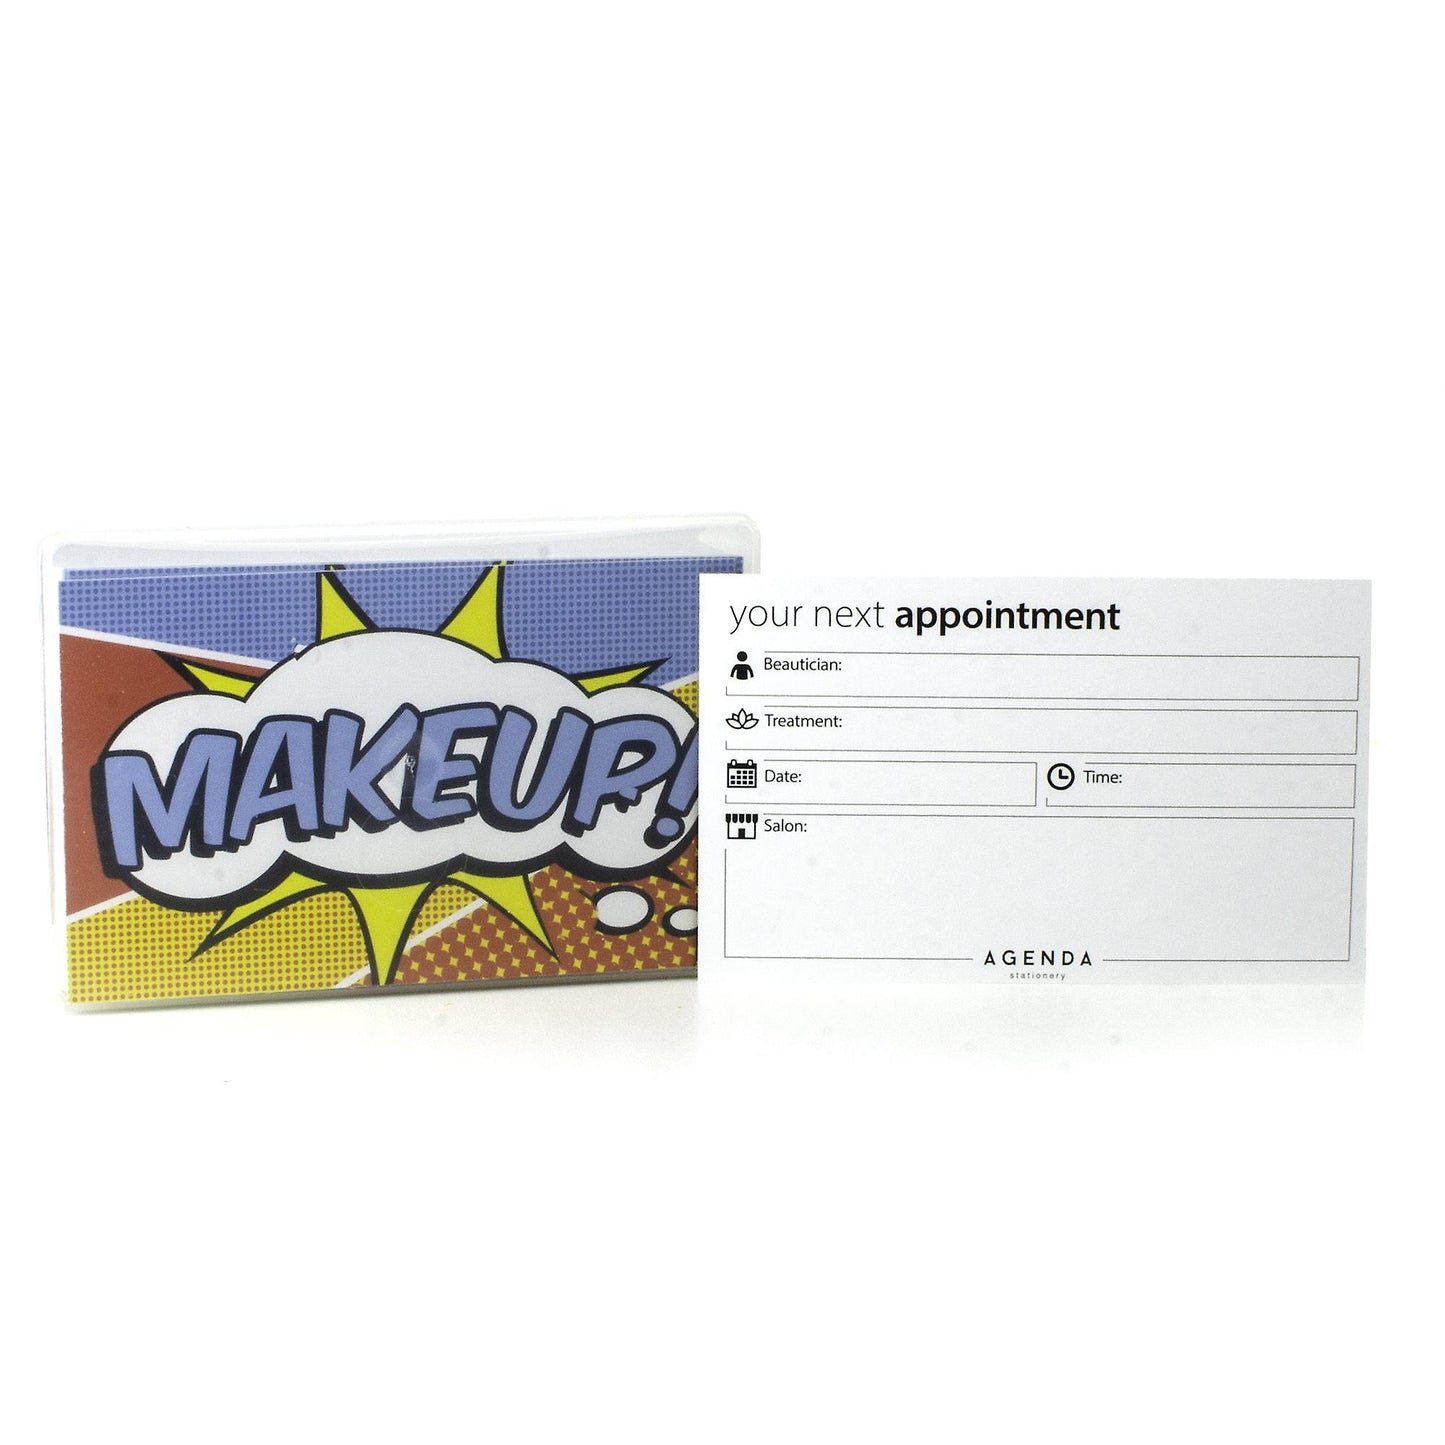 Agenda Makeup! Tech Appointment Cards 100 Pack